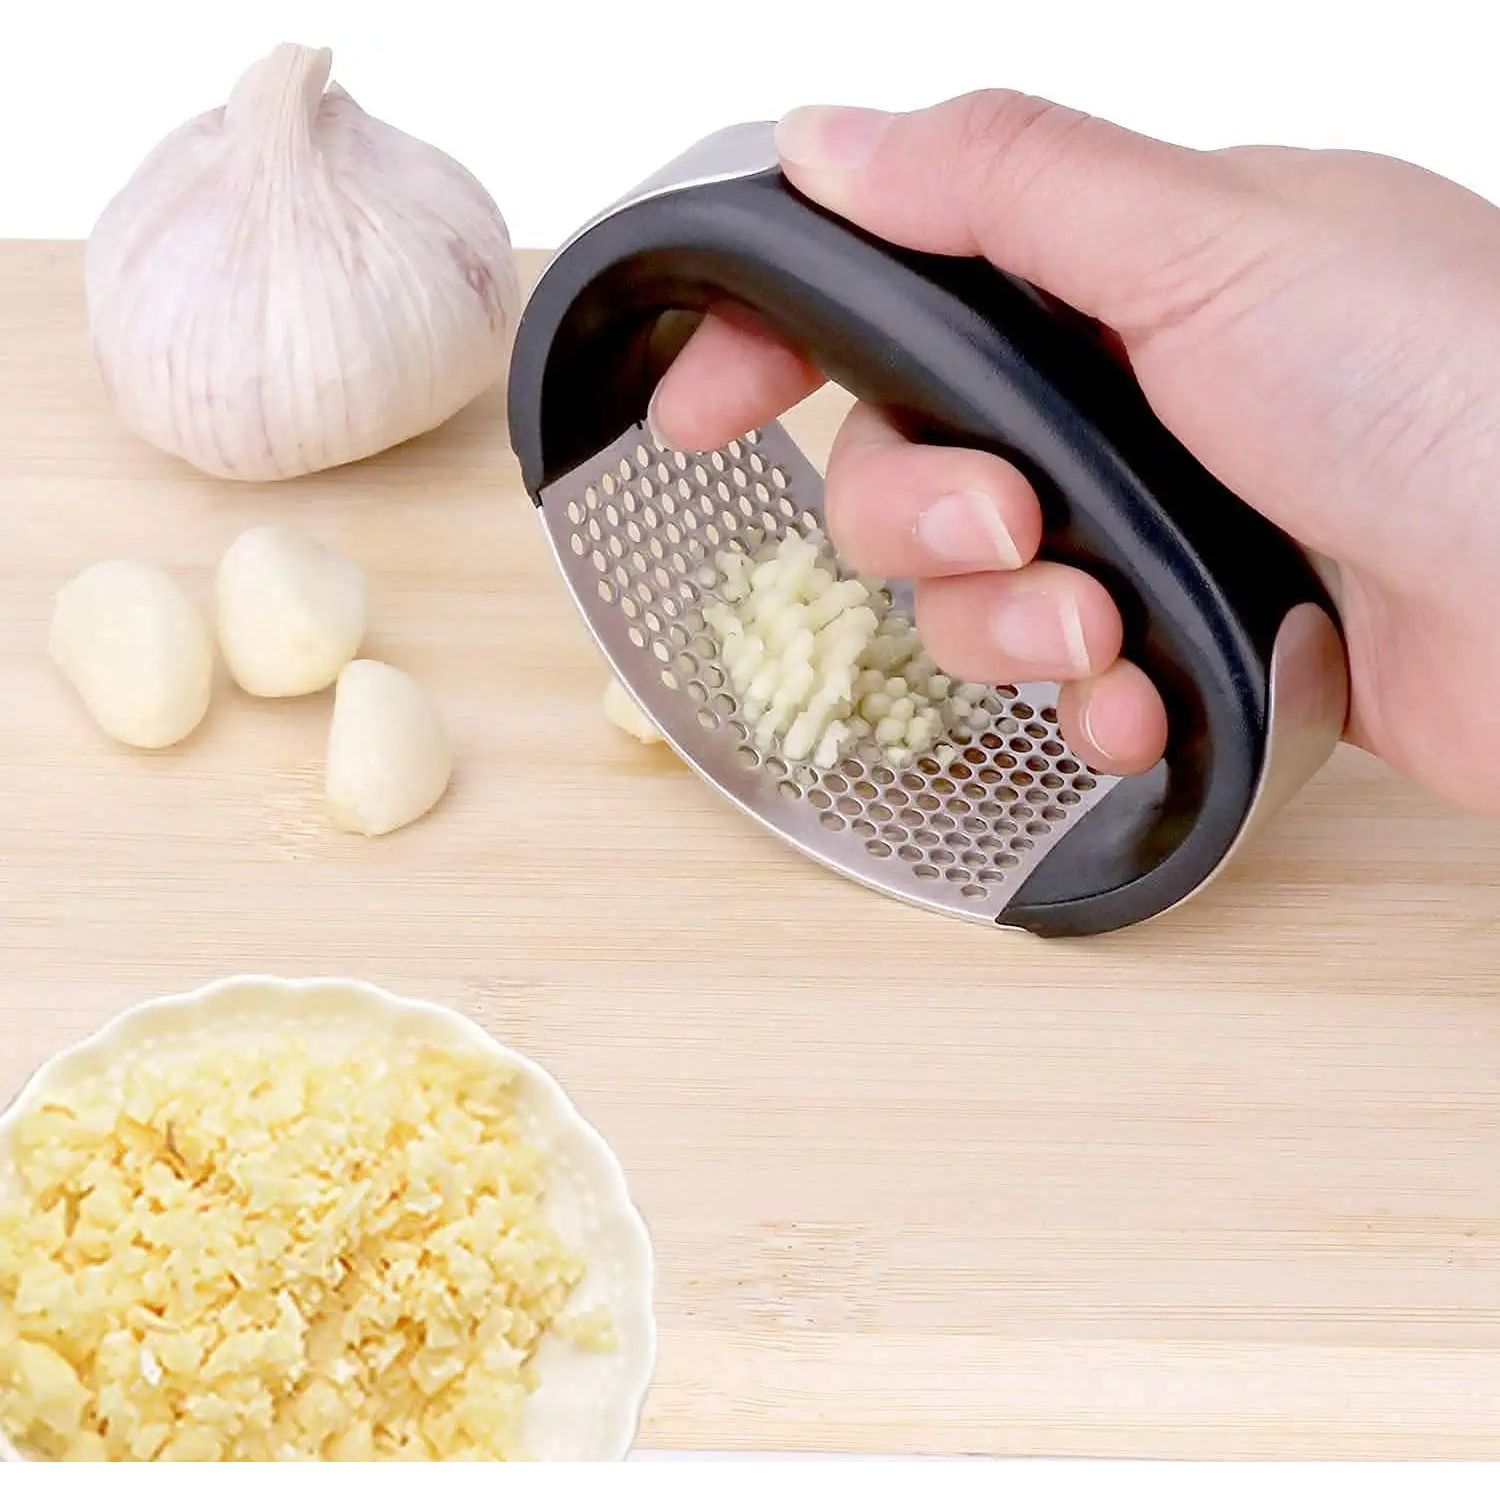 VEGETABLE PRESS™ | STAINLESS STEEL MANUAL PRESS FOR GARLIC AND VEGETABLES.